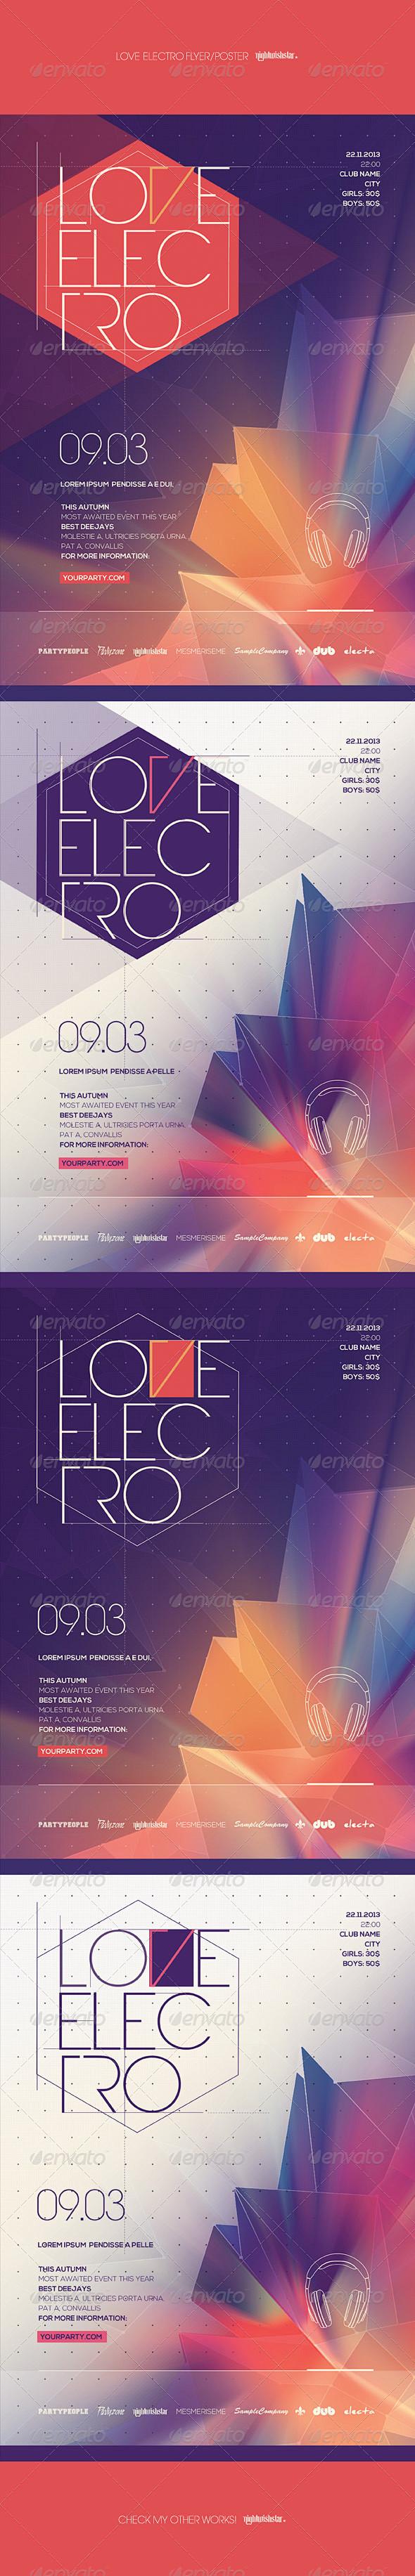 Love Electro PosterF...